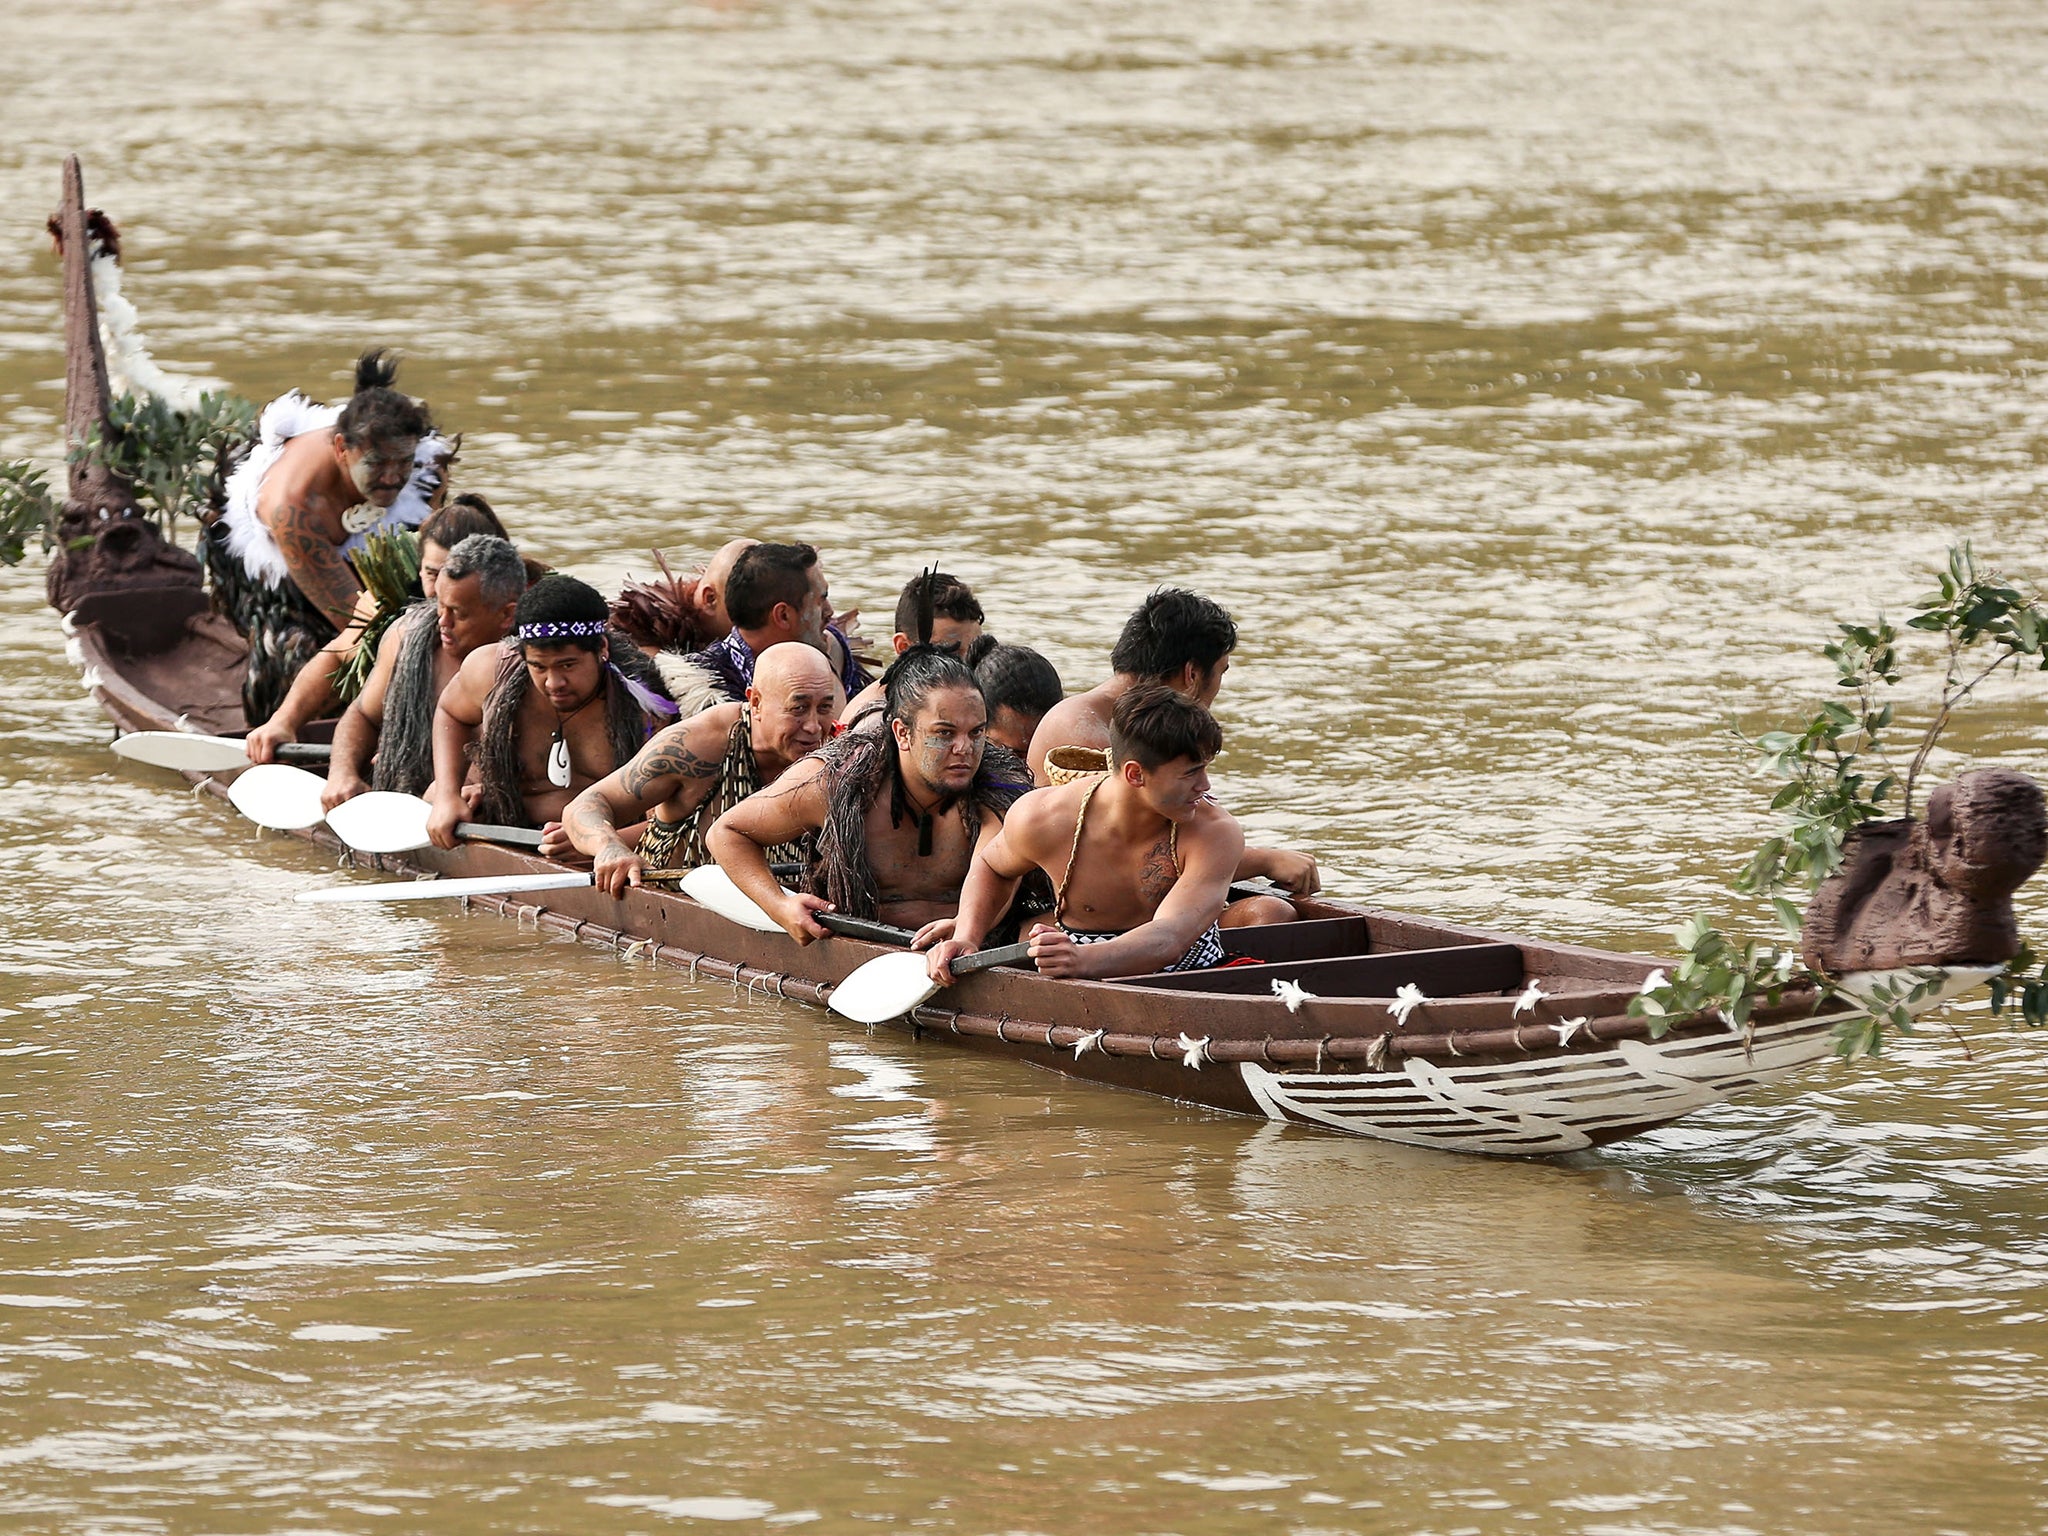 A Maori crew on the Whanganui river during Prince Harry's visit to New Zealand